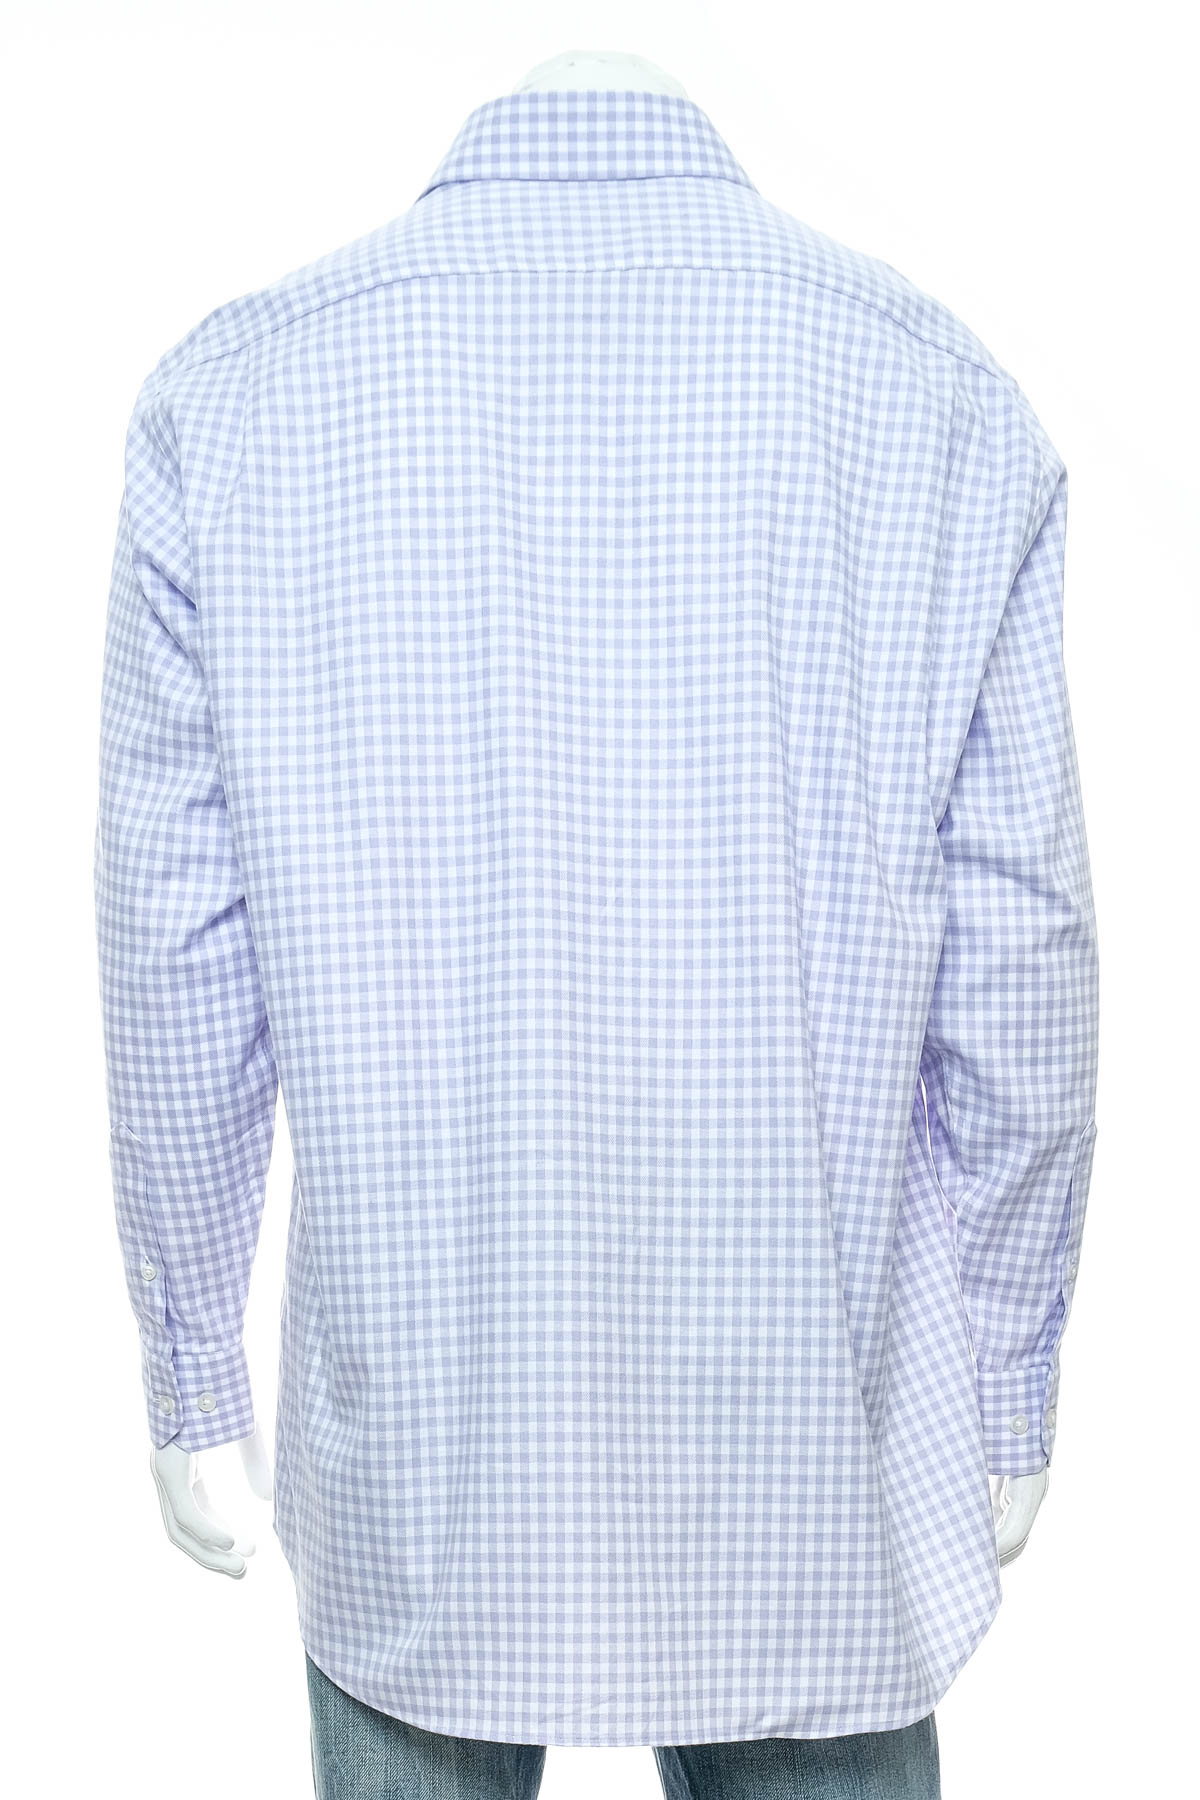 Men's shirt - COLLECTION by MICHAEL STRAHAN - 1